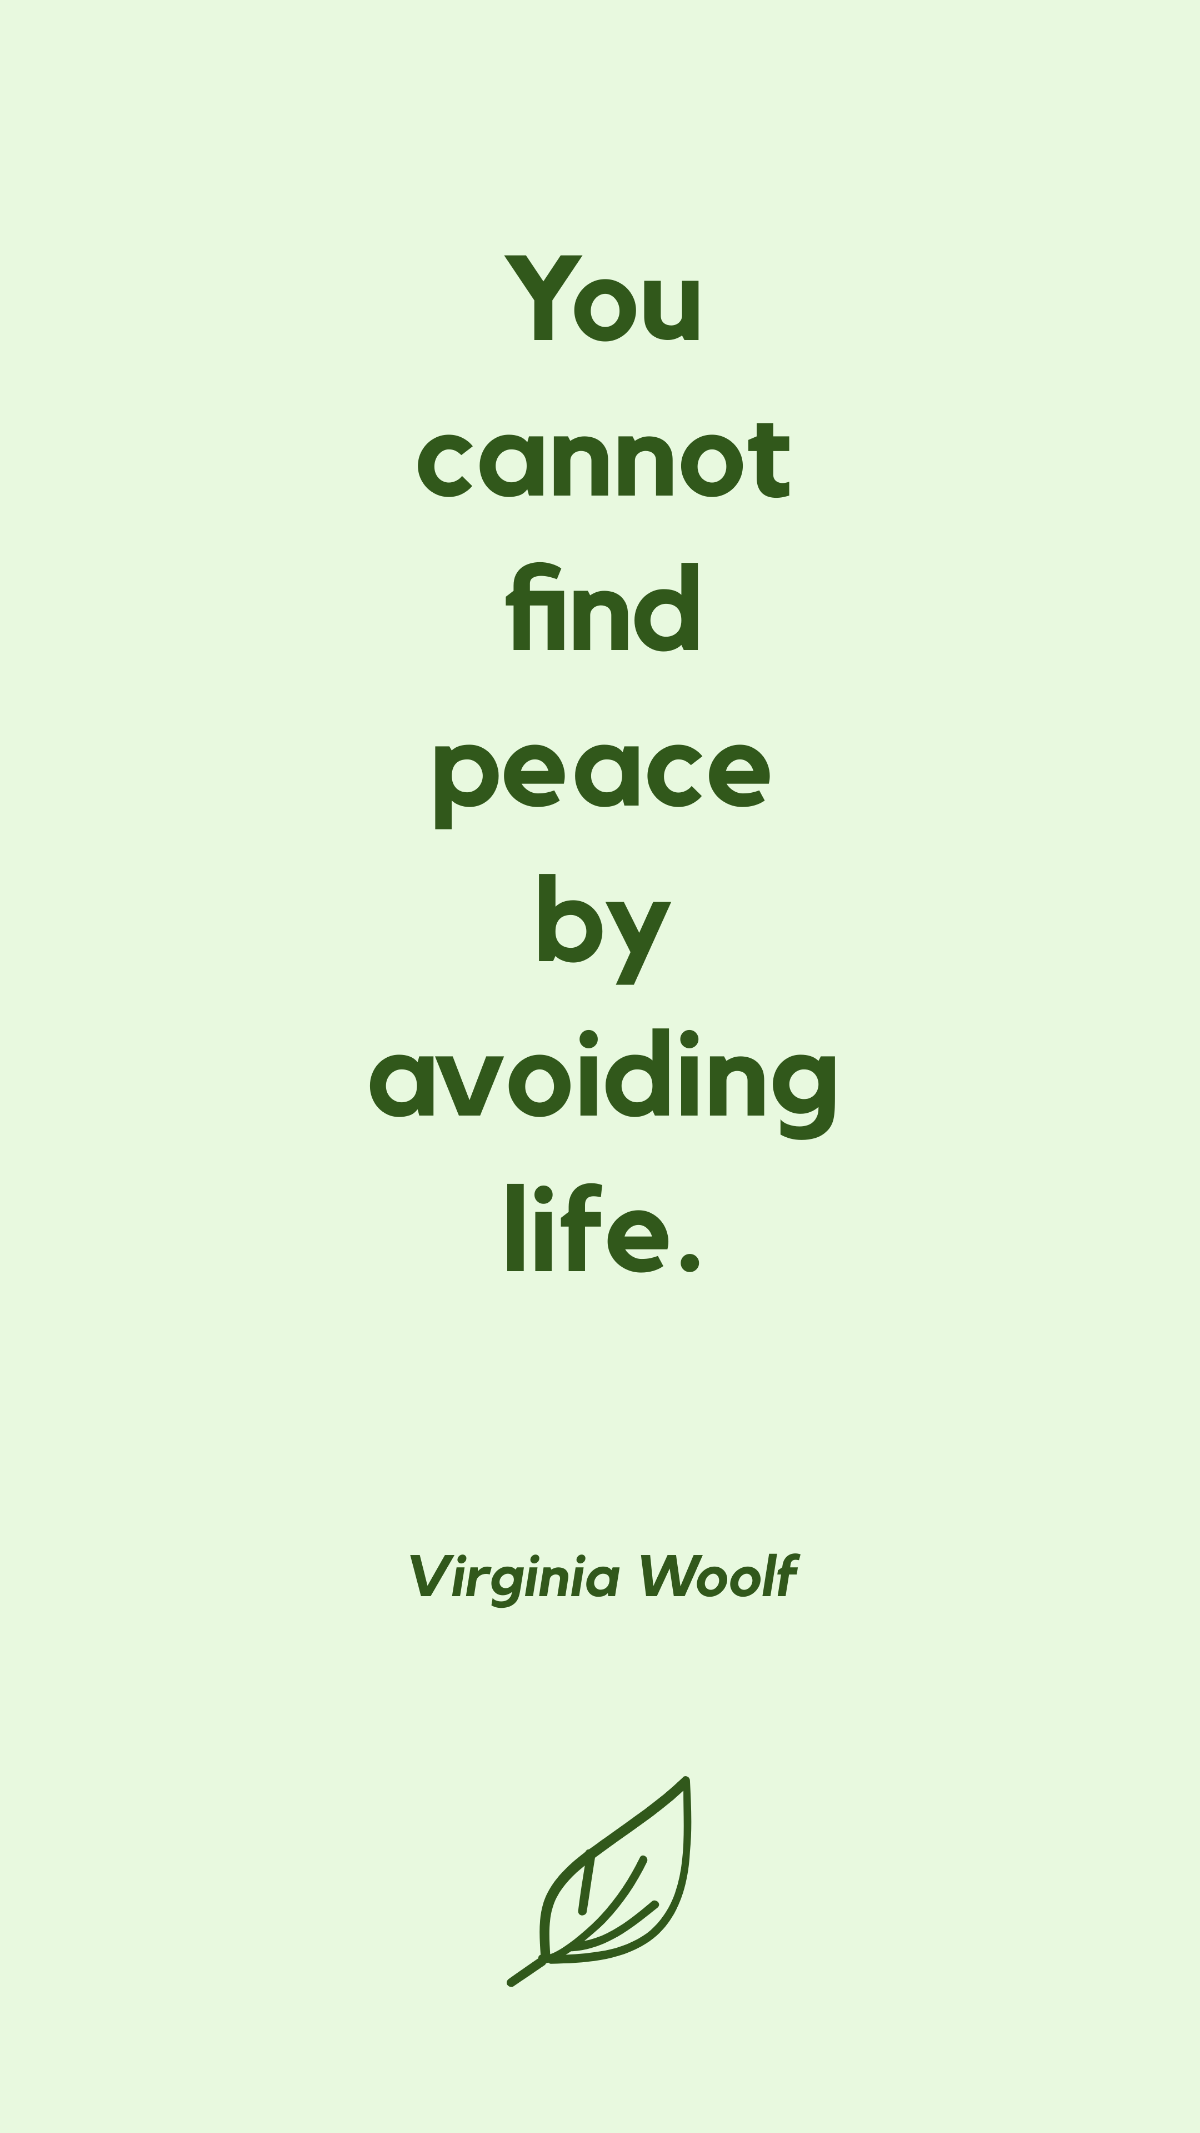 Virginia Woolf - You cannot find peace by avoiding life. Template